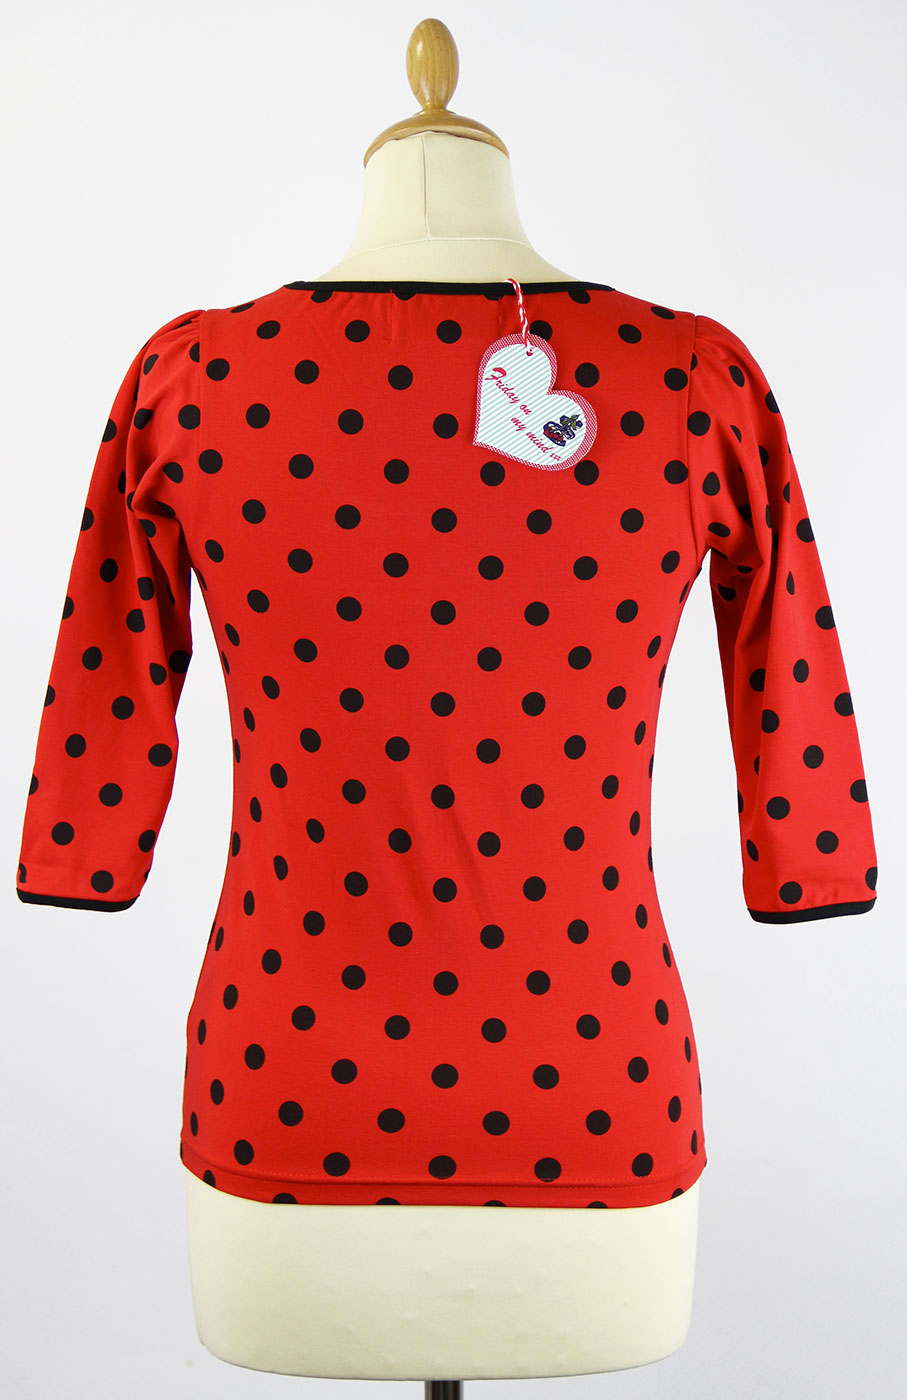 Friday On My Mind Retro 60s Mod Polka Dot Top in Red/Black